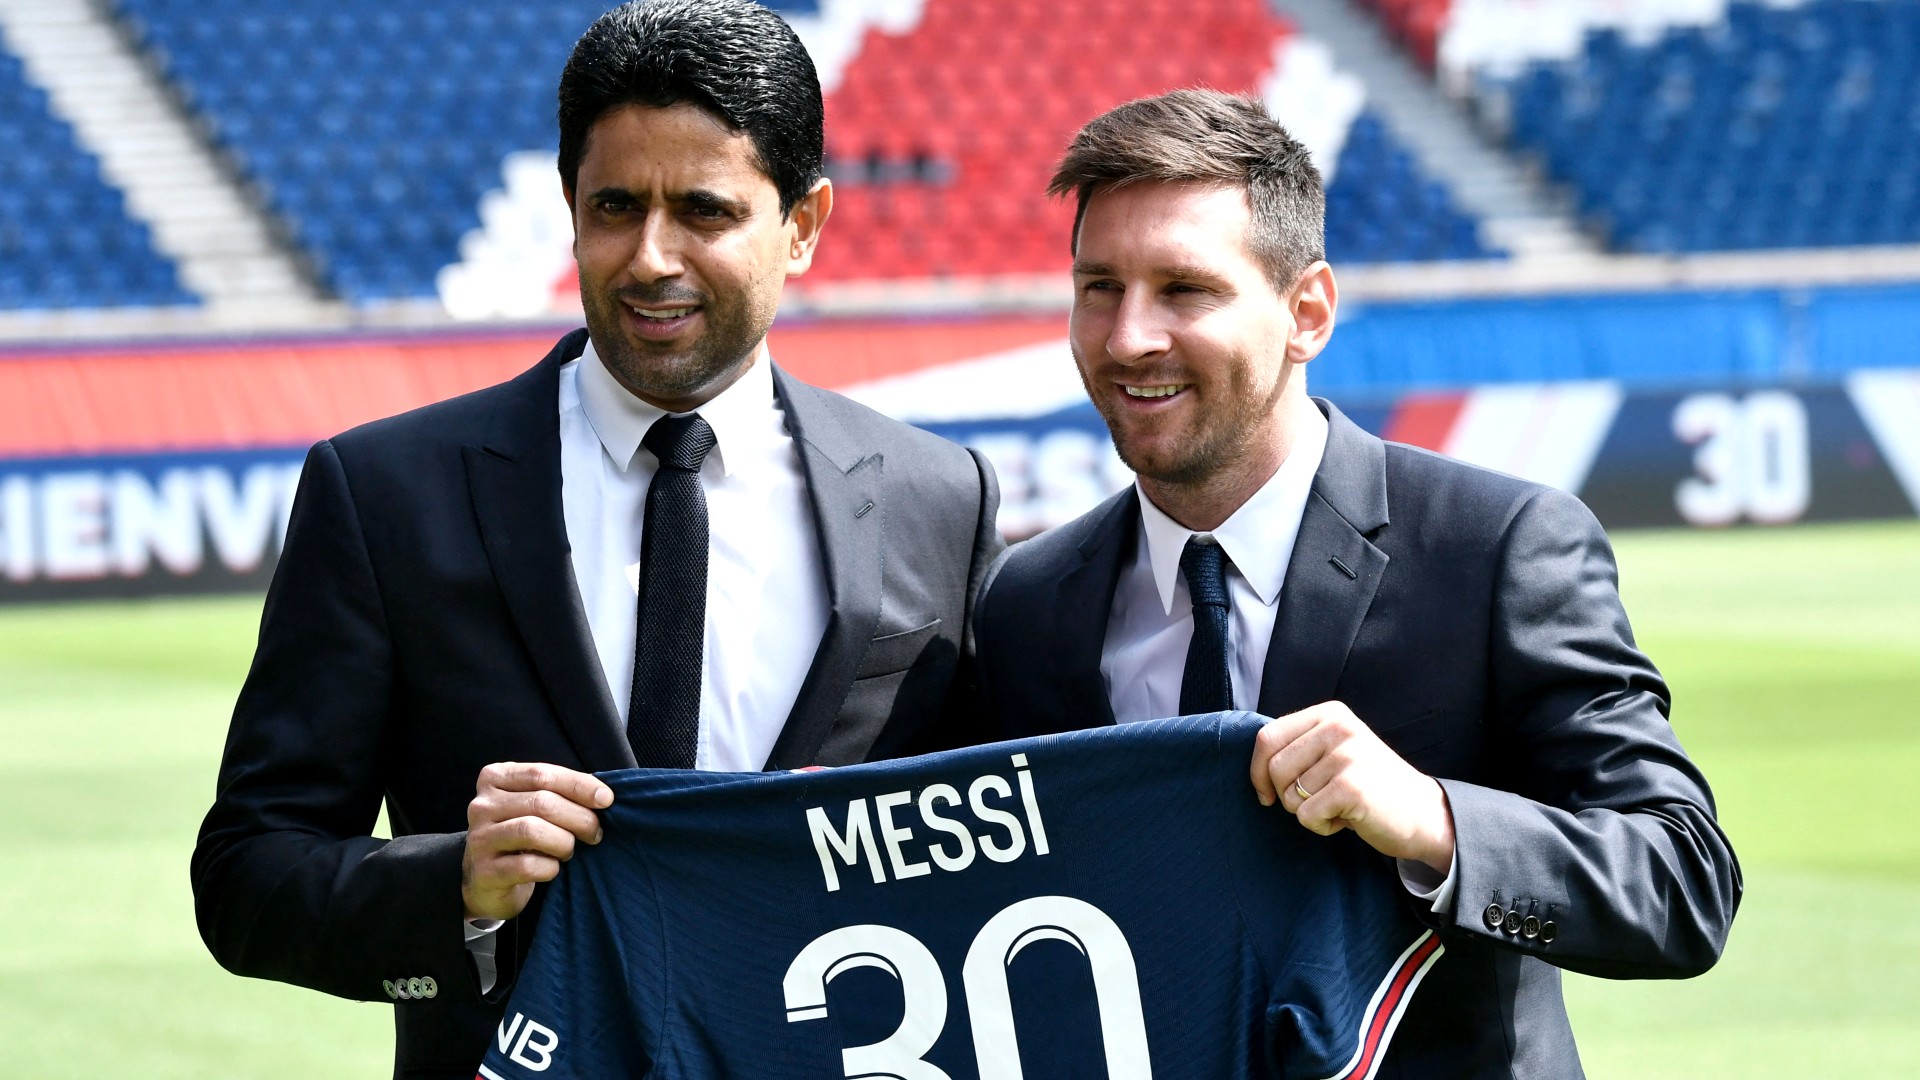 SPORT Lionel Messi unveiled at PSG Key takeaways from